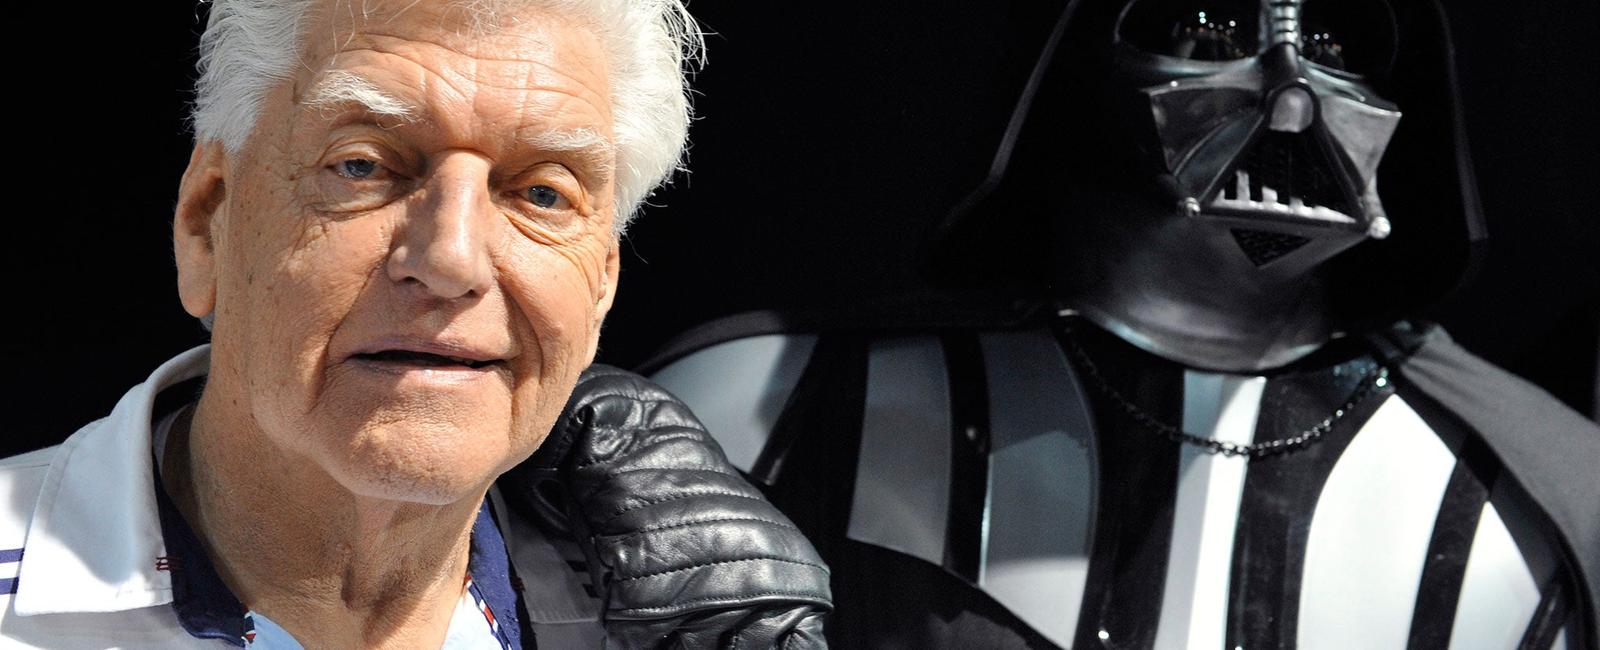 David prowse was the guy in the darth vader suit in star wars he spoke all of vader s lines and didn t know that he was going to be dubbed over by james earl jones until he saw the screening of the movie